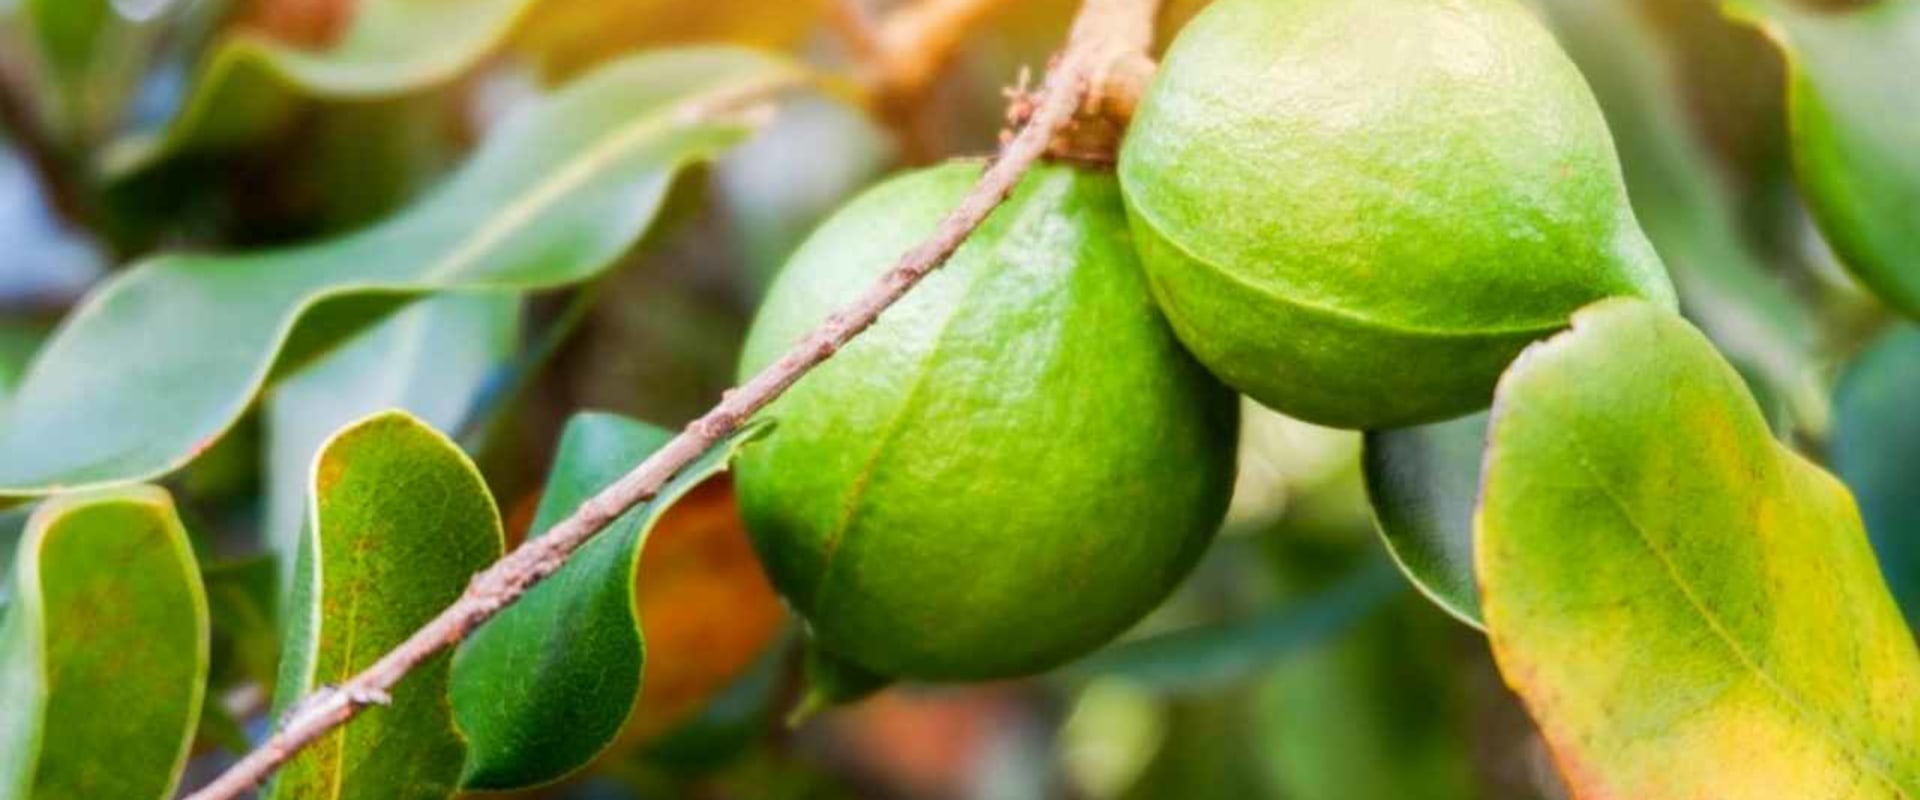 When are macadamia nuts ready to harvest?